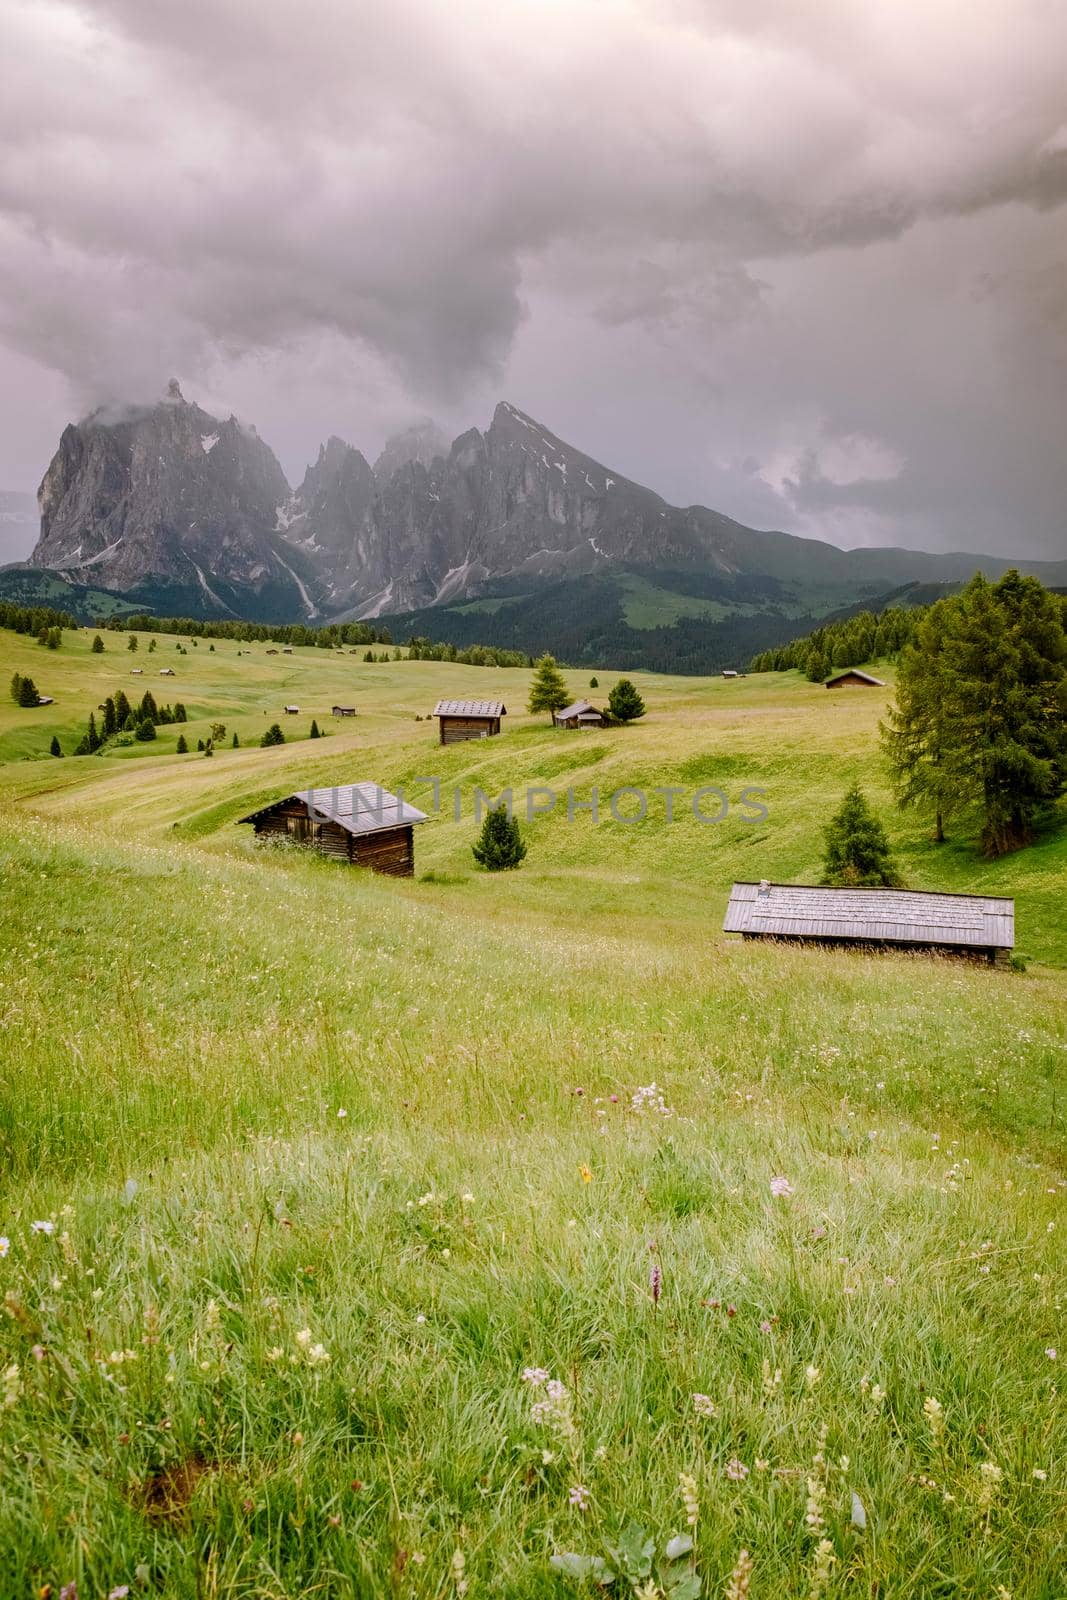 Alpe di Siusi - Seiser Alm with Sassolungo - Langkofel mountain group in background at sunset. Yellow spring flowers and wooden chalets in Dolomites, Trentino Alto Adige, South Tyrol, Italy, Europe by fokkebok